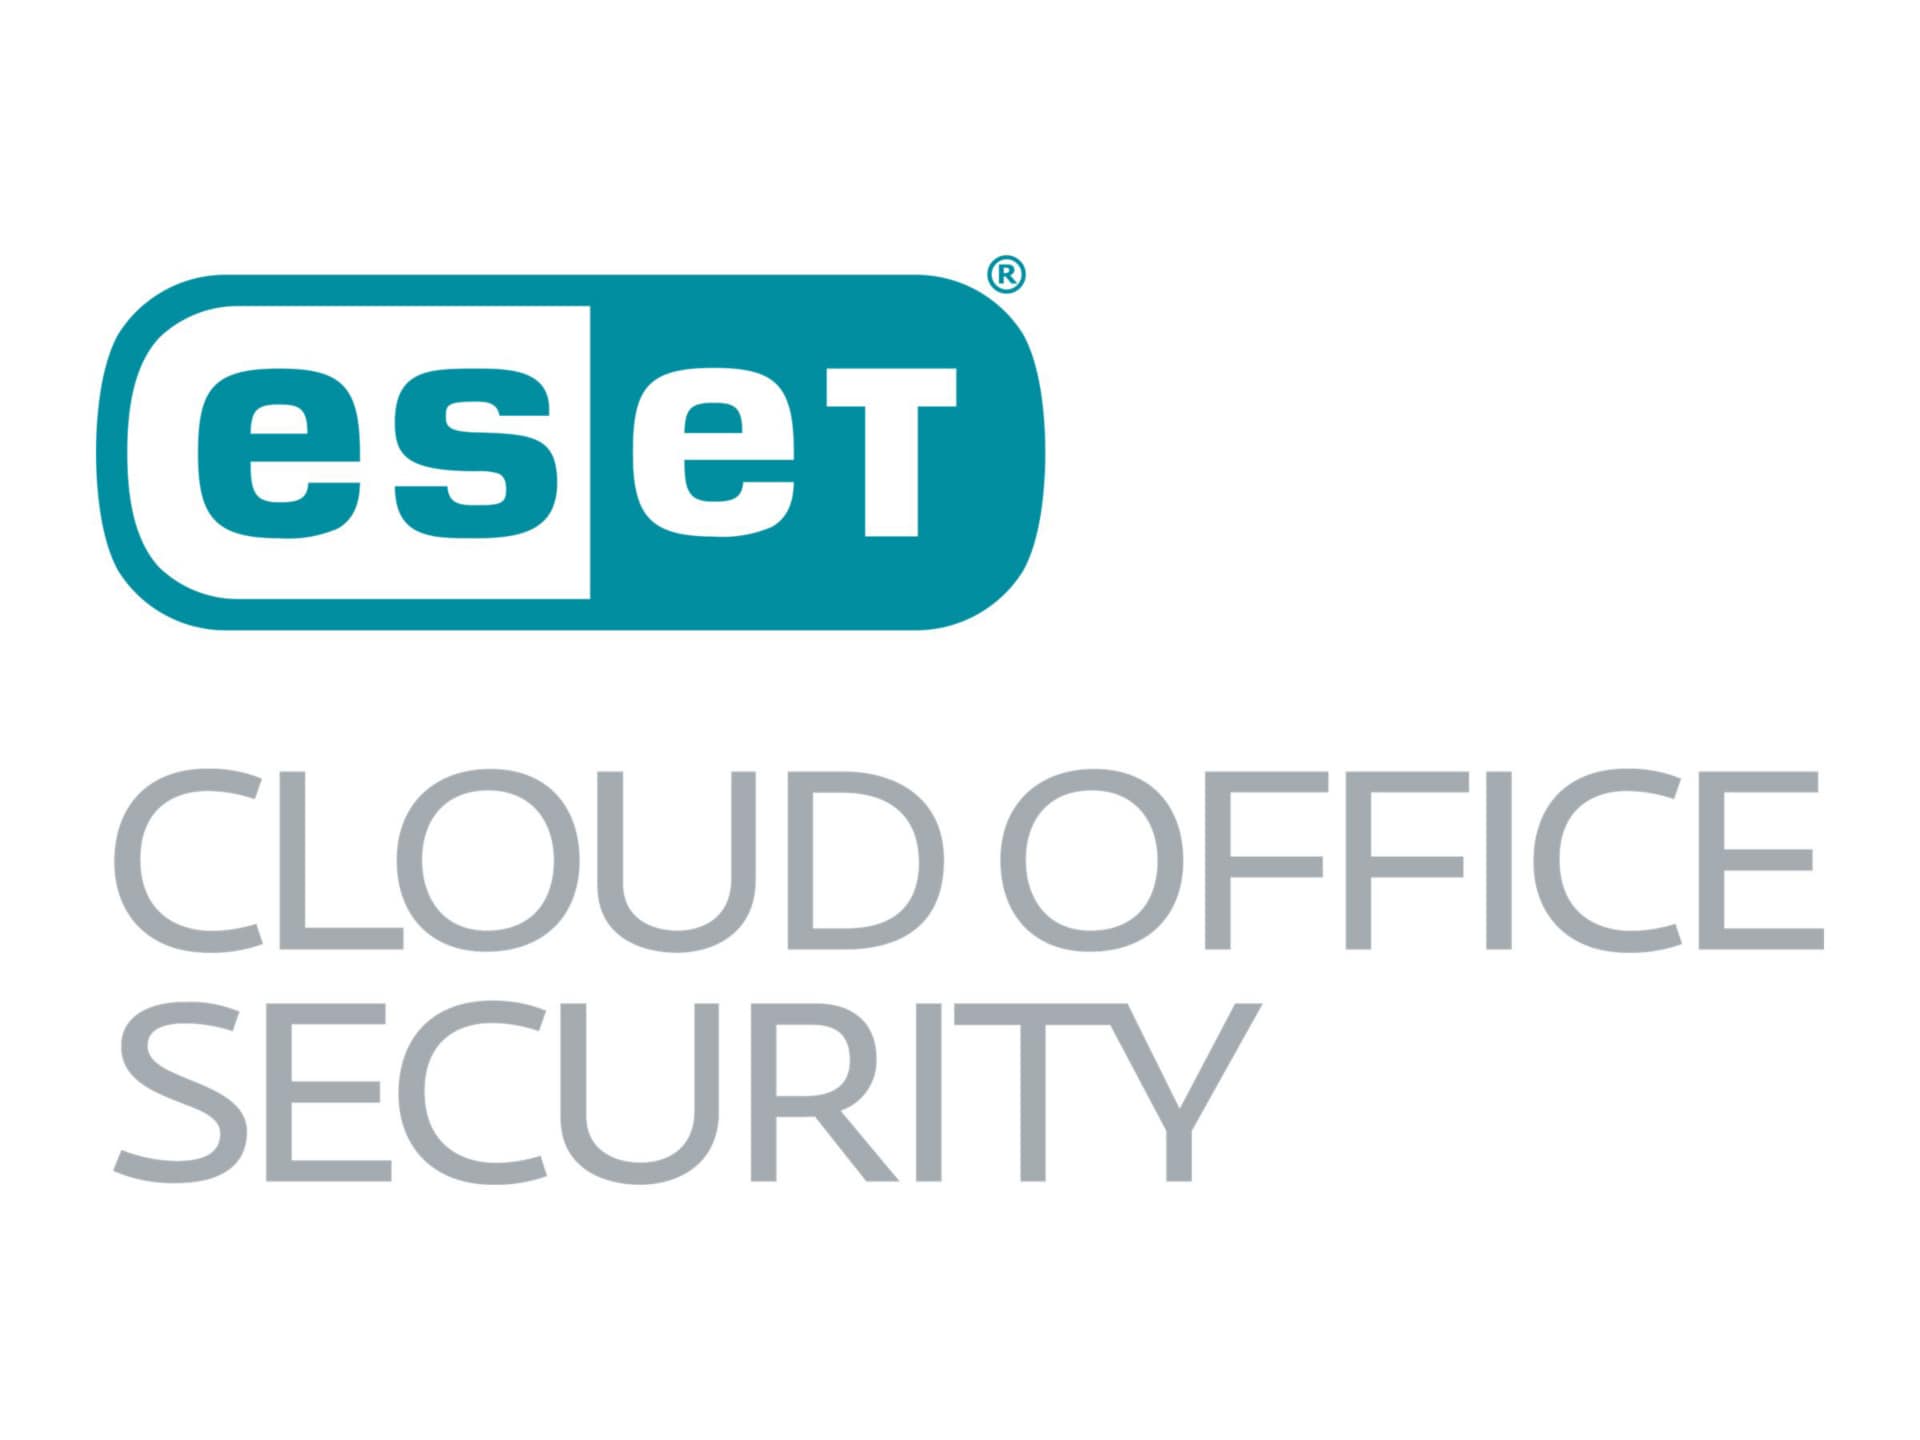 ESET Cloud Office Security - subscription license (1 year) - 1 seat